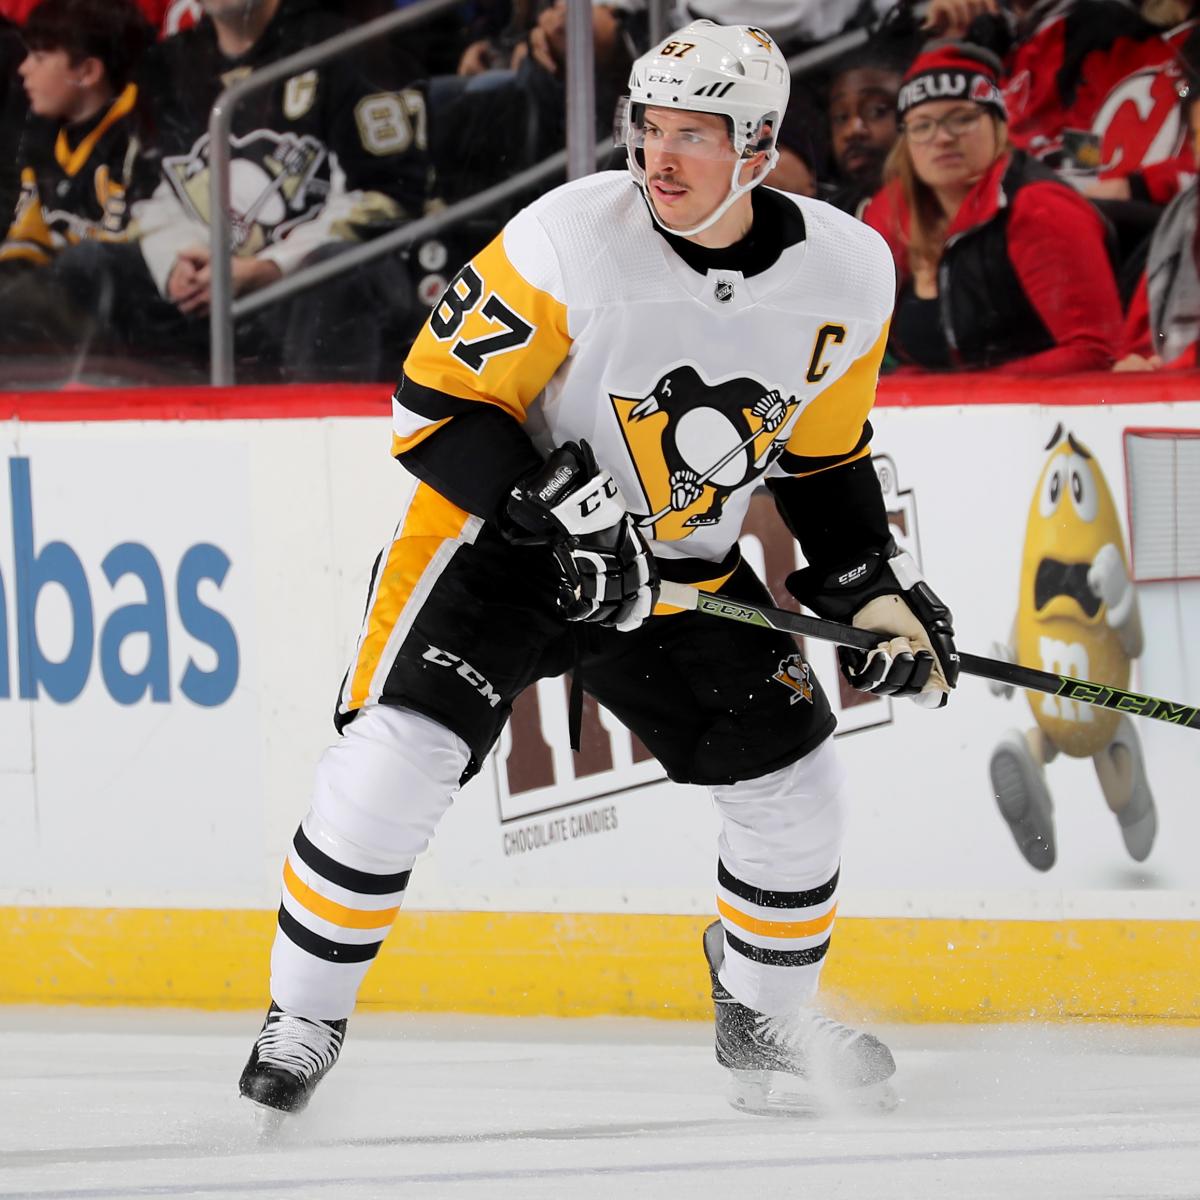 Sidney Crosby to Return to Penguins After Recovering from UpperBody